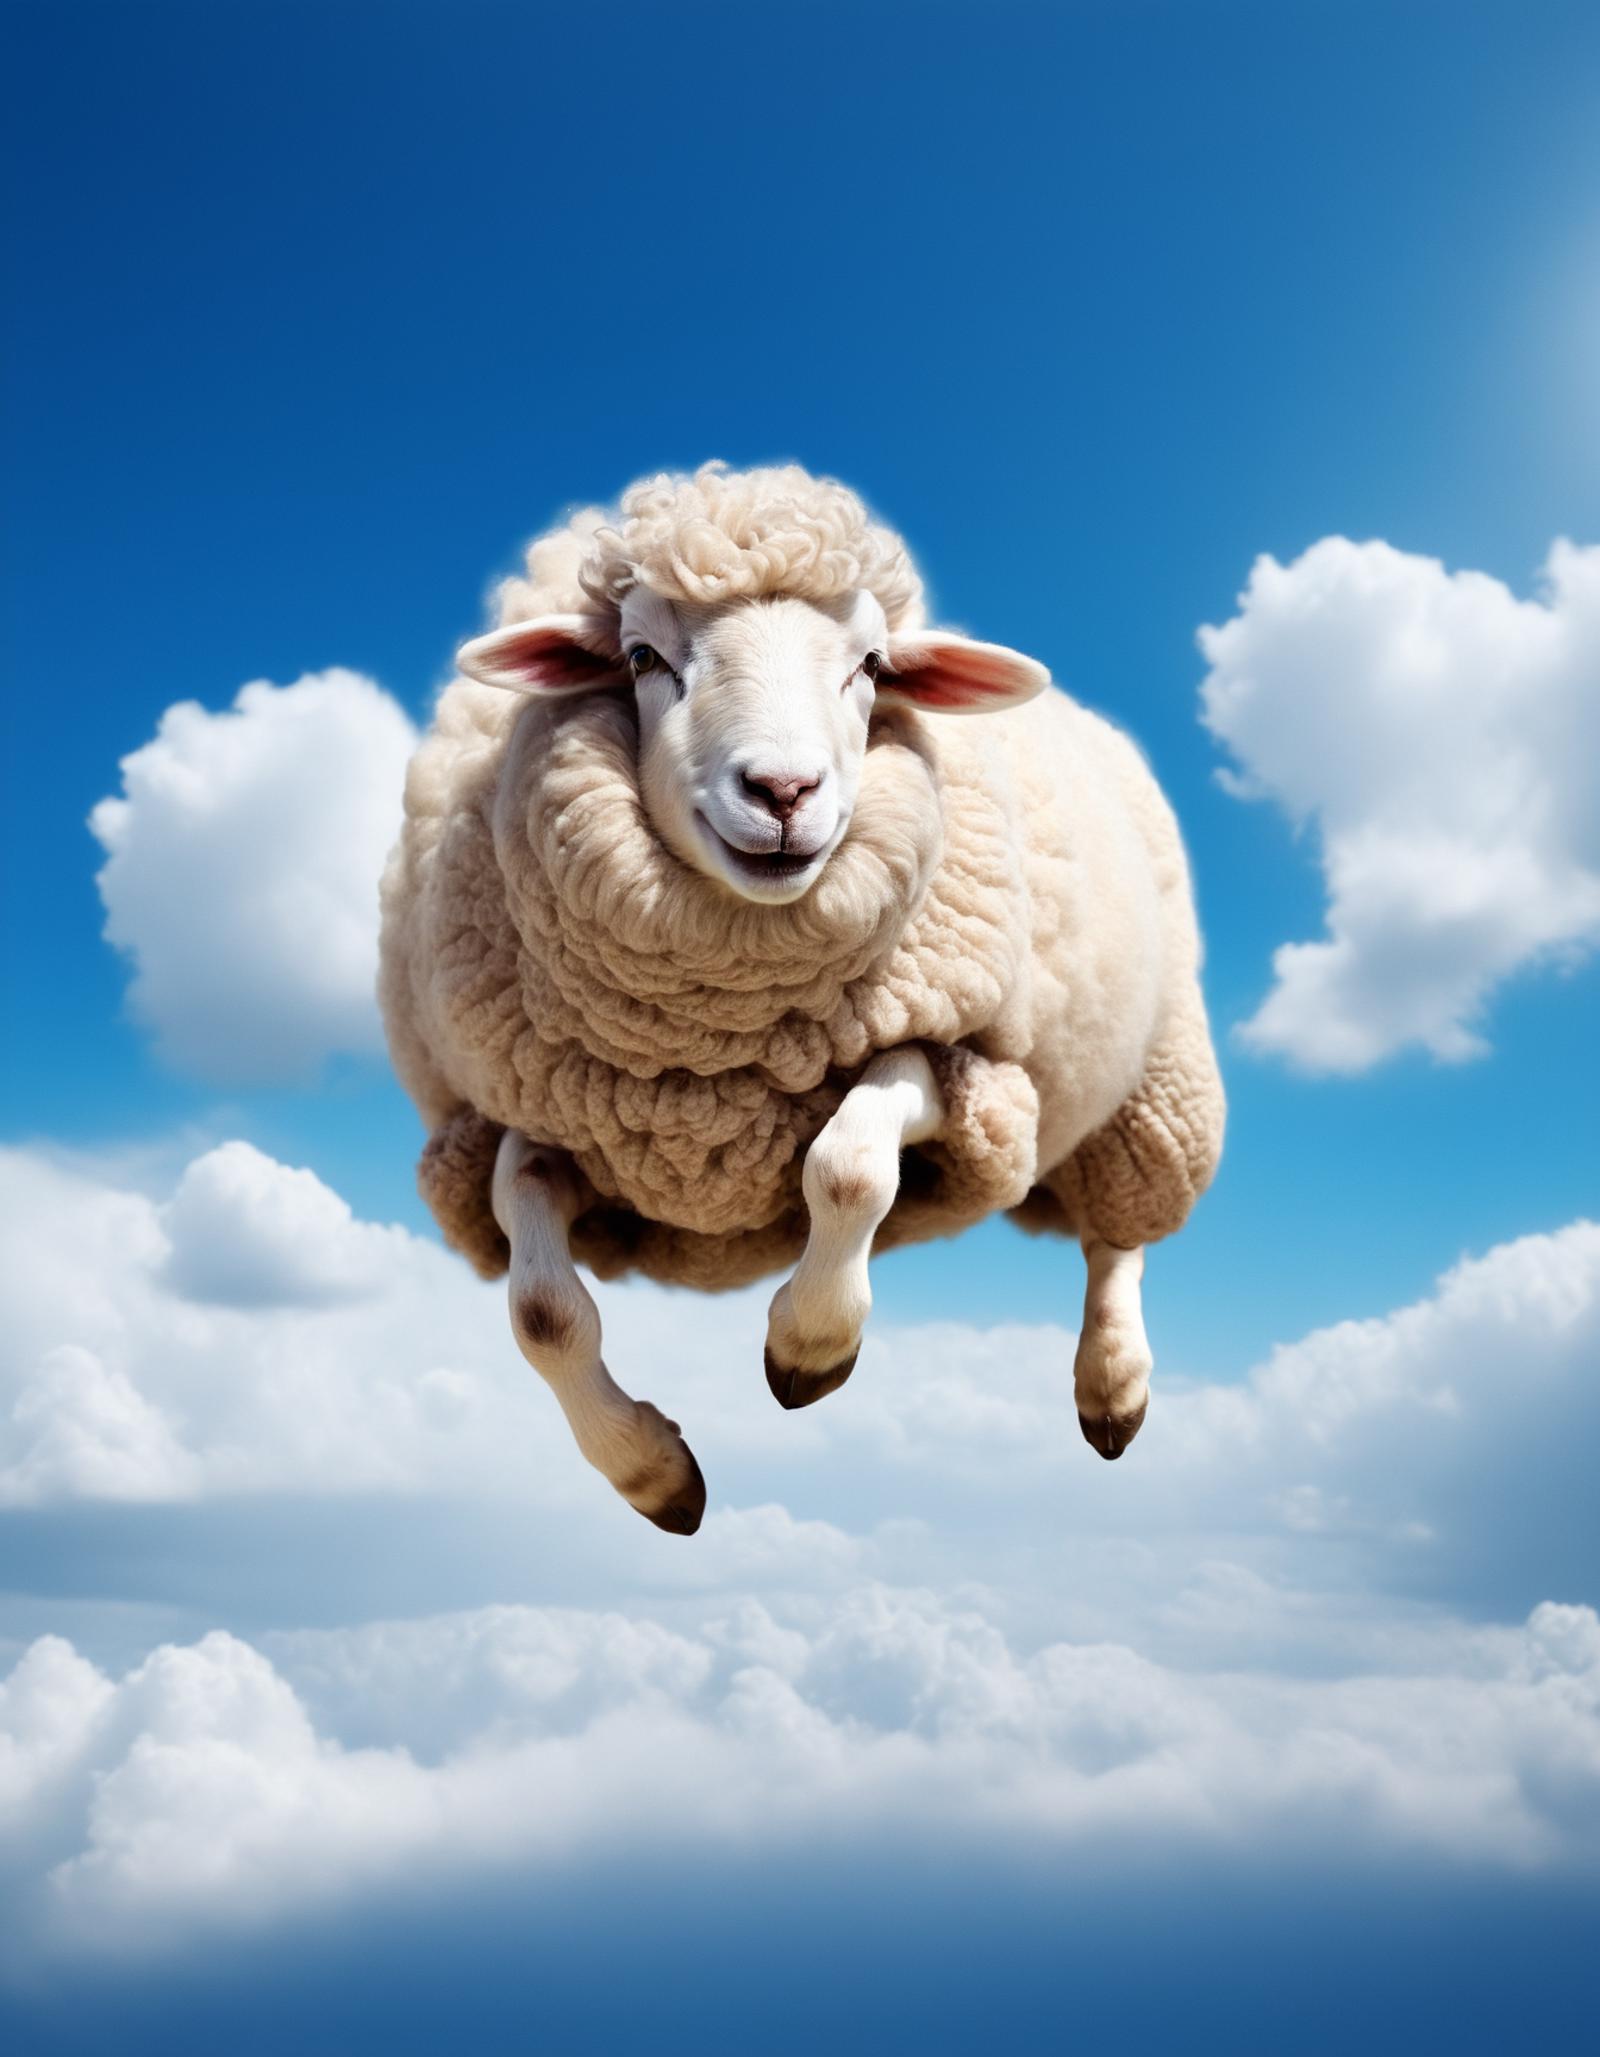 A sheep with a woolly coat leaps through the air against a blue sky background.